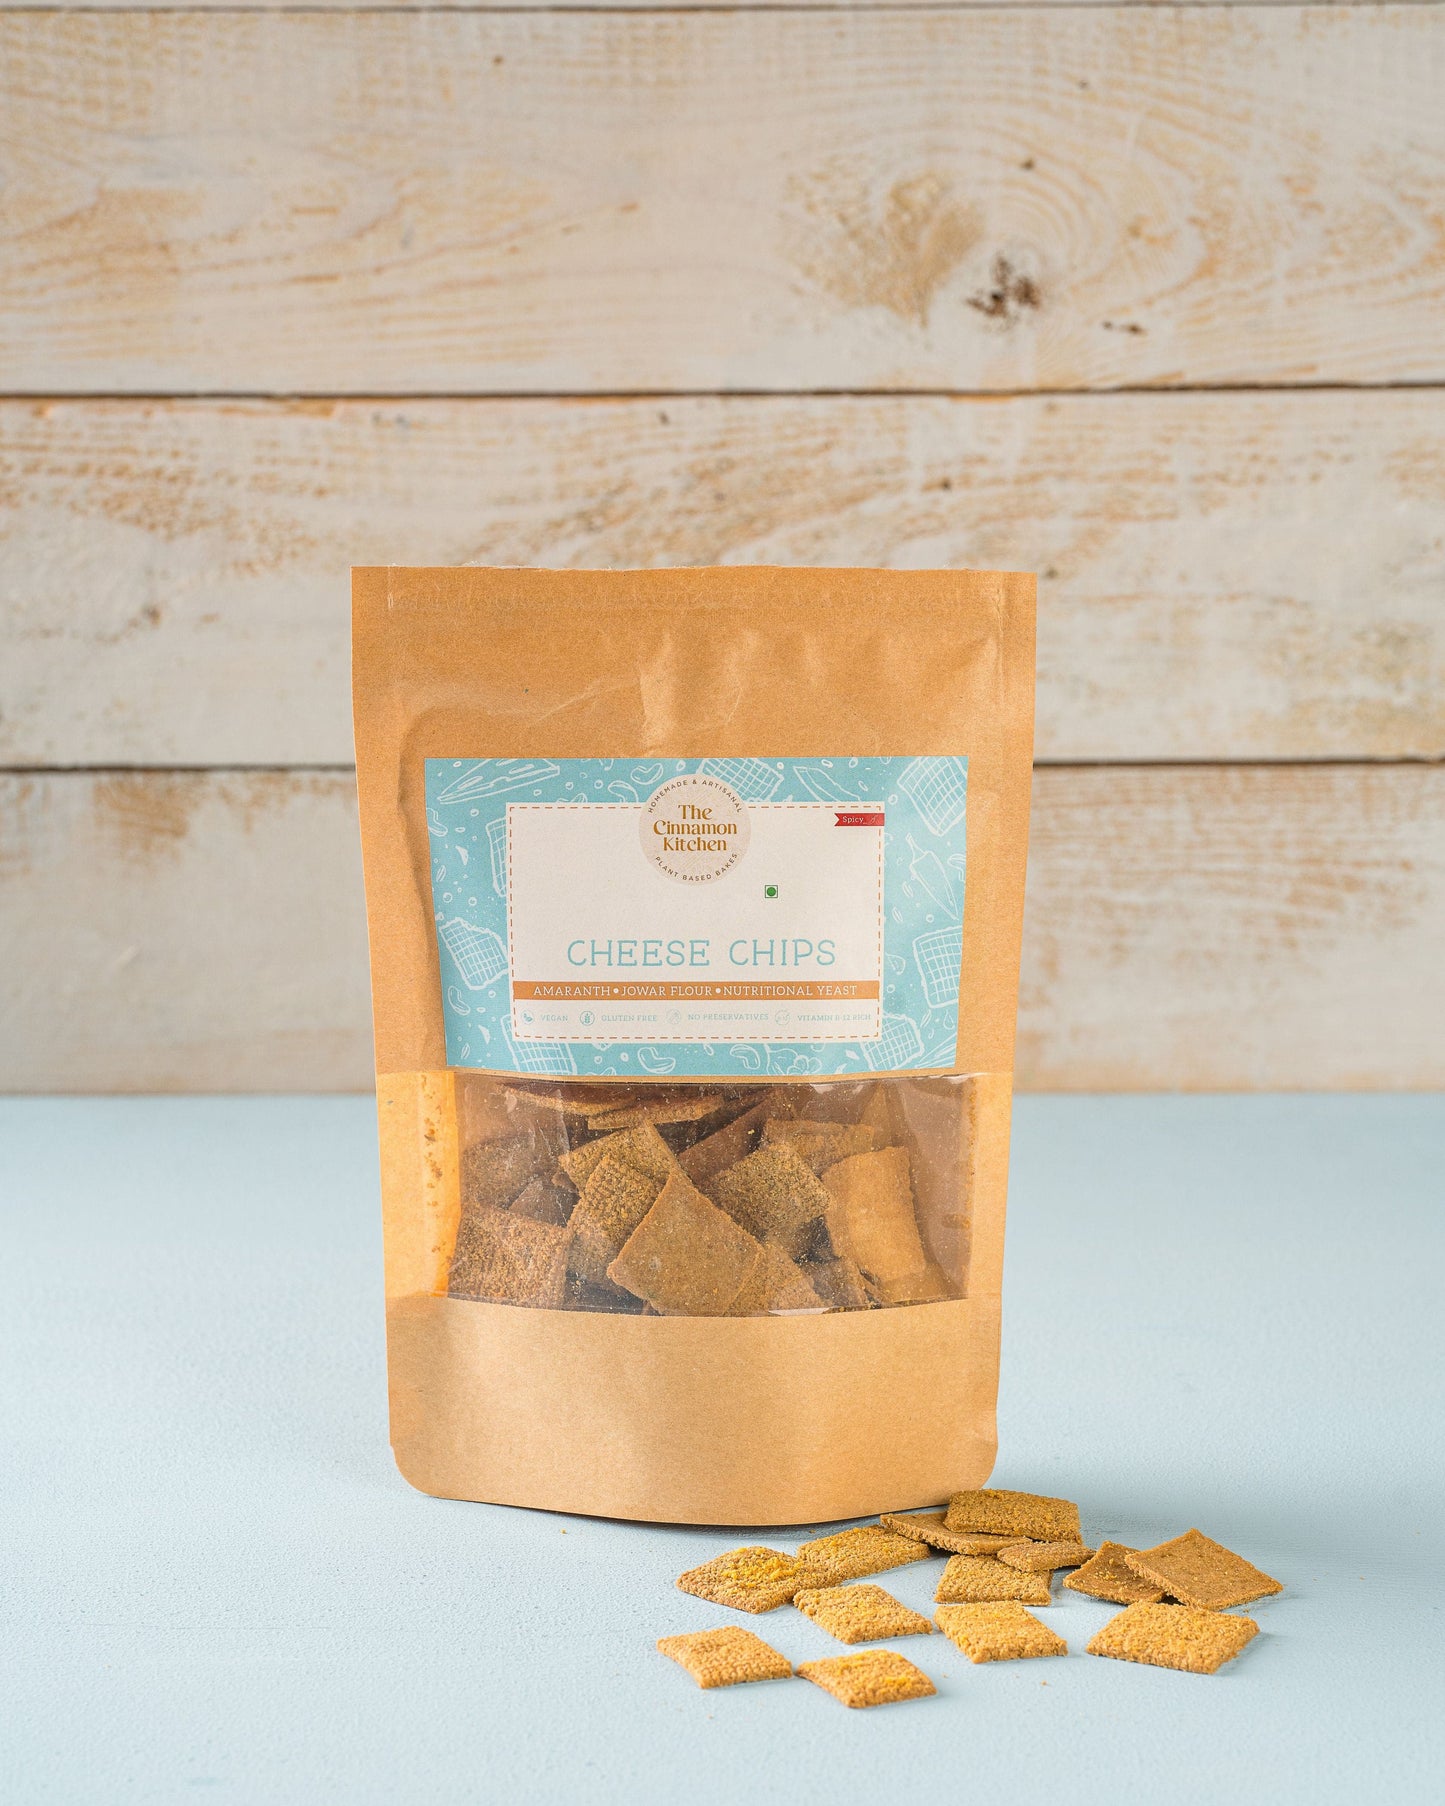 The Cinnamon Kitchen Dairy Free Cheezy Chips 100g (Dairy - Free, Plant Based)